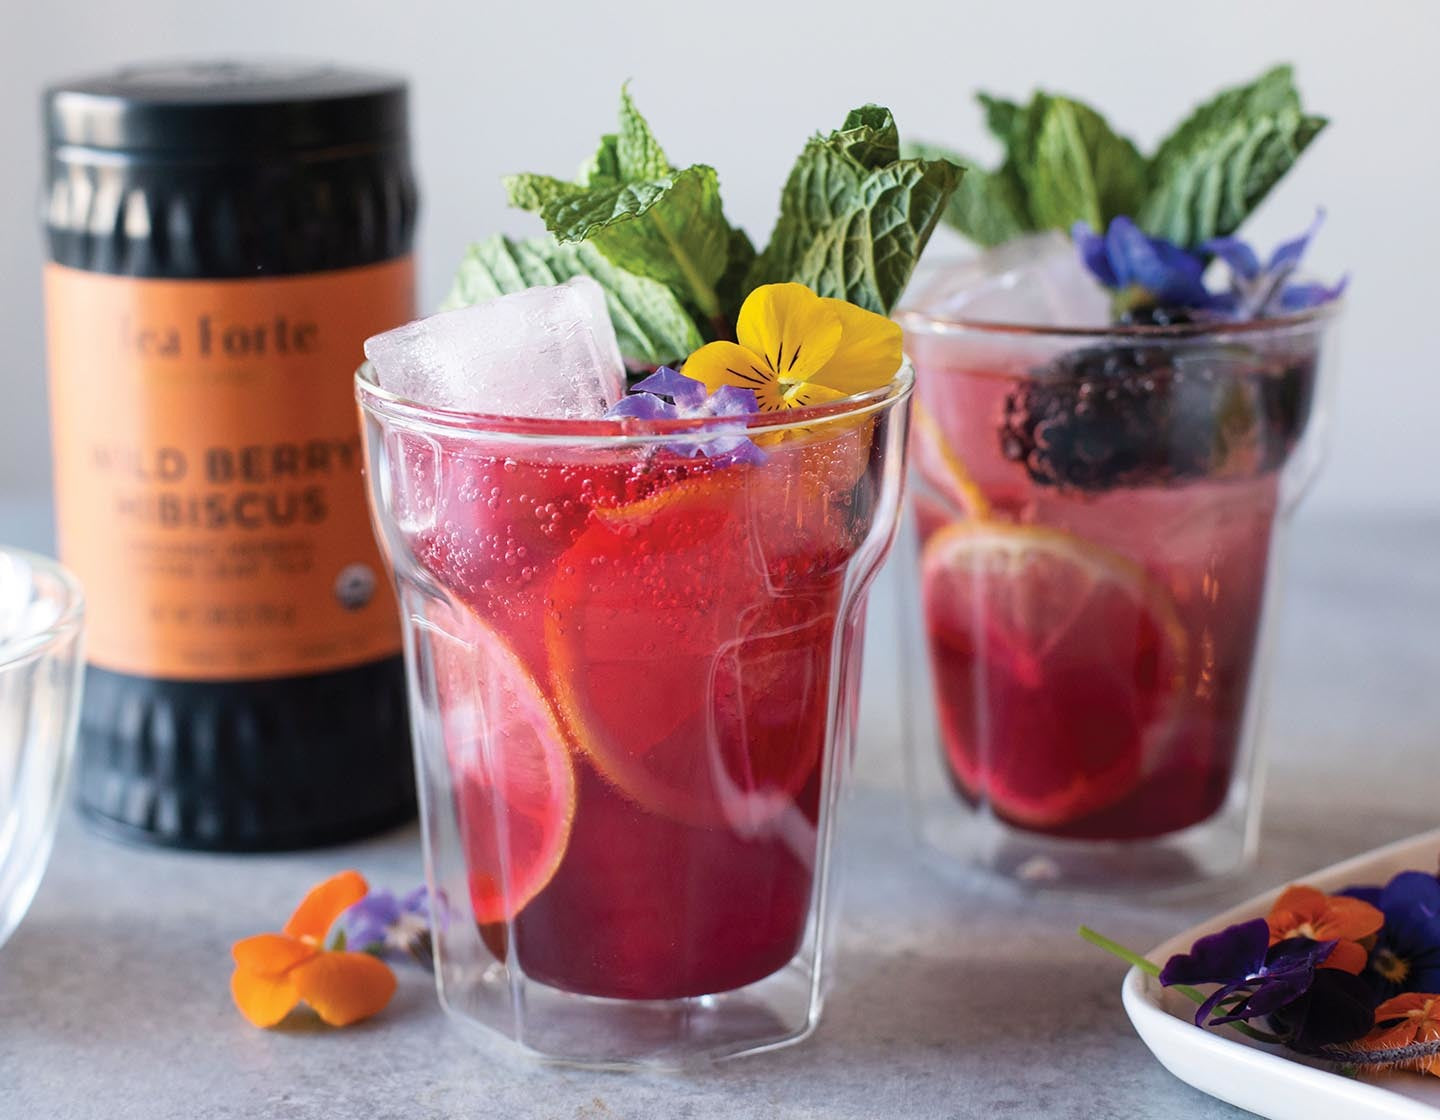 Wild Berry Hibiscus Spritzer decorated with violets and a loose tea canister in background